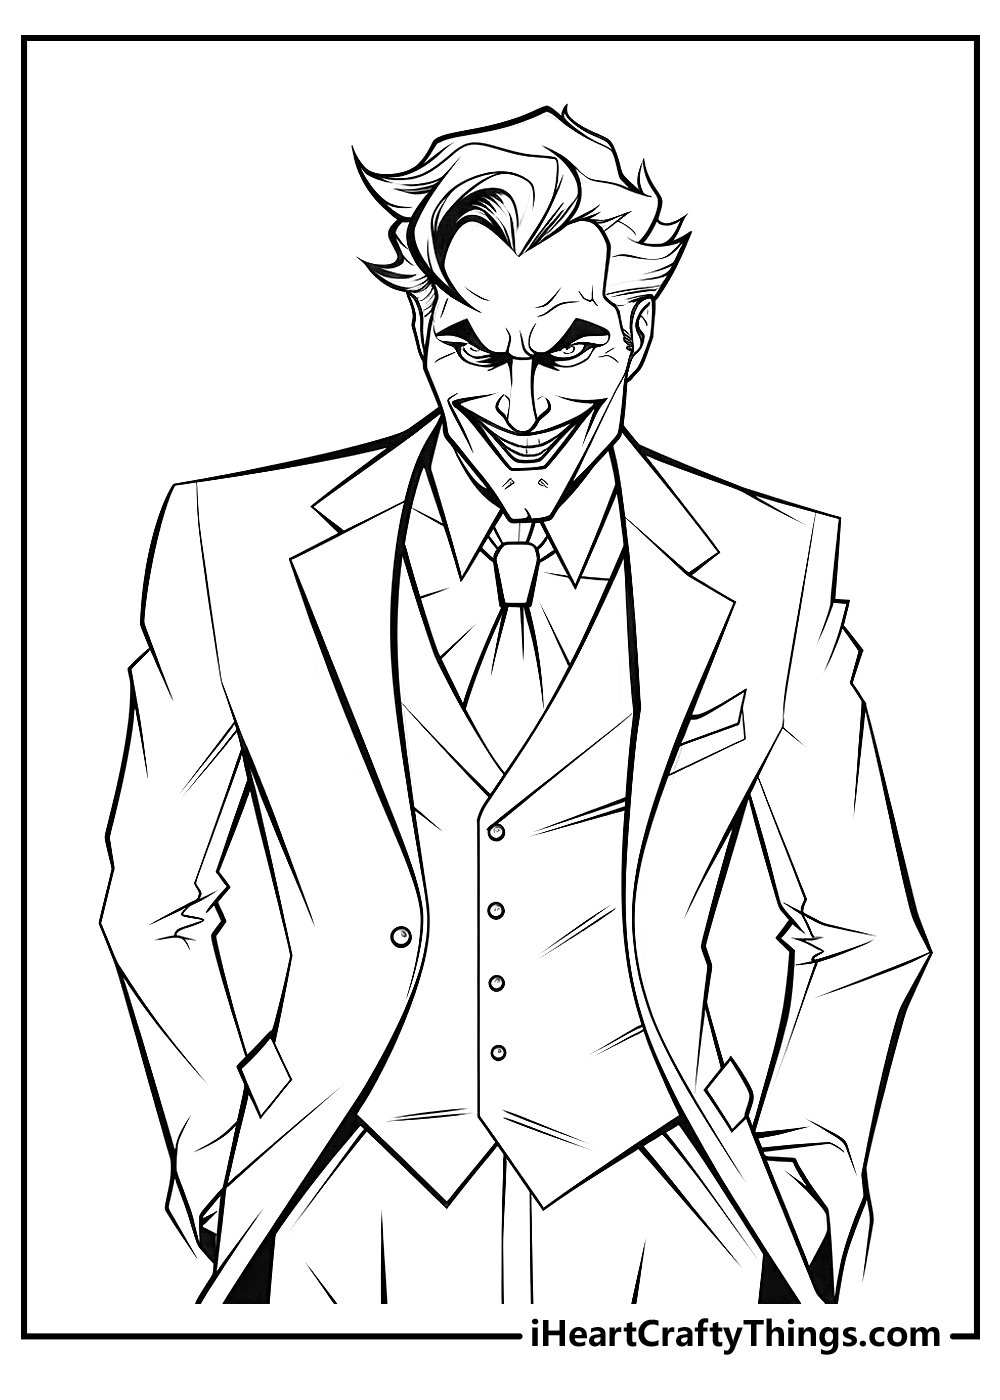 Joker coloring pages free printables